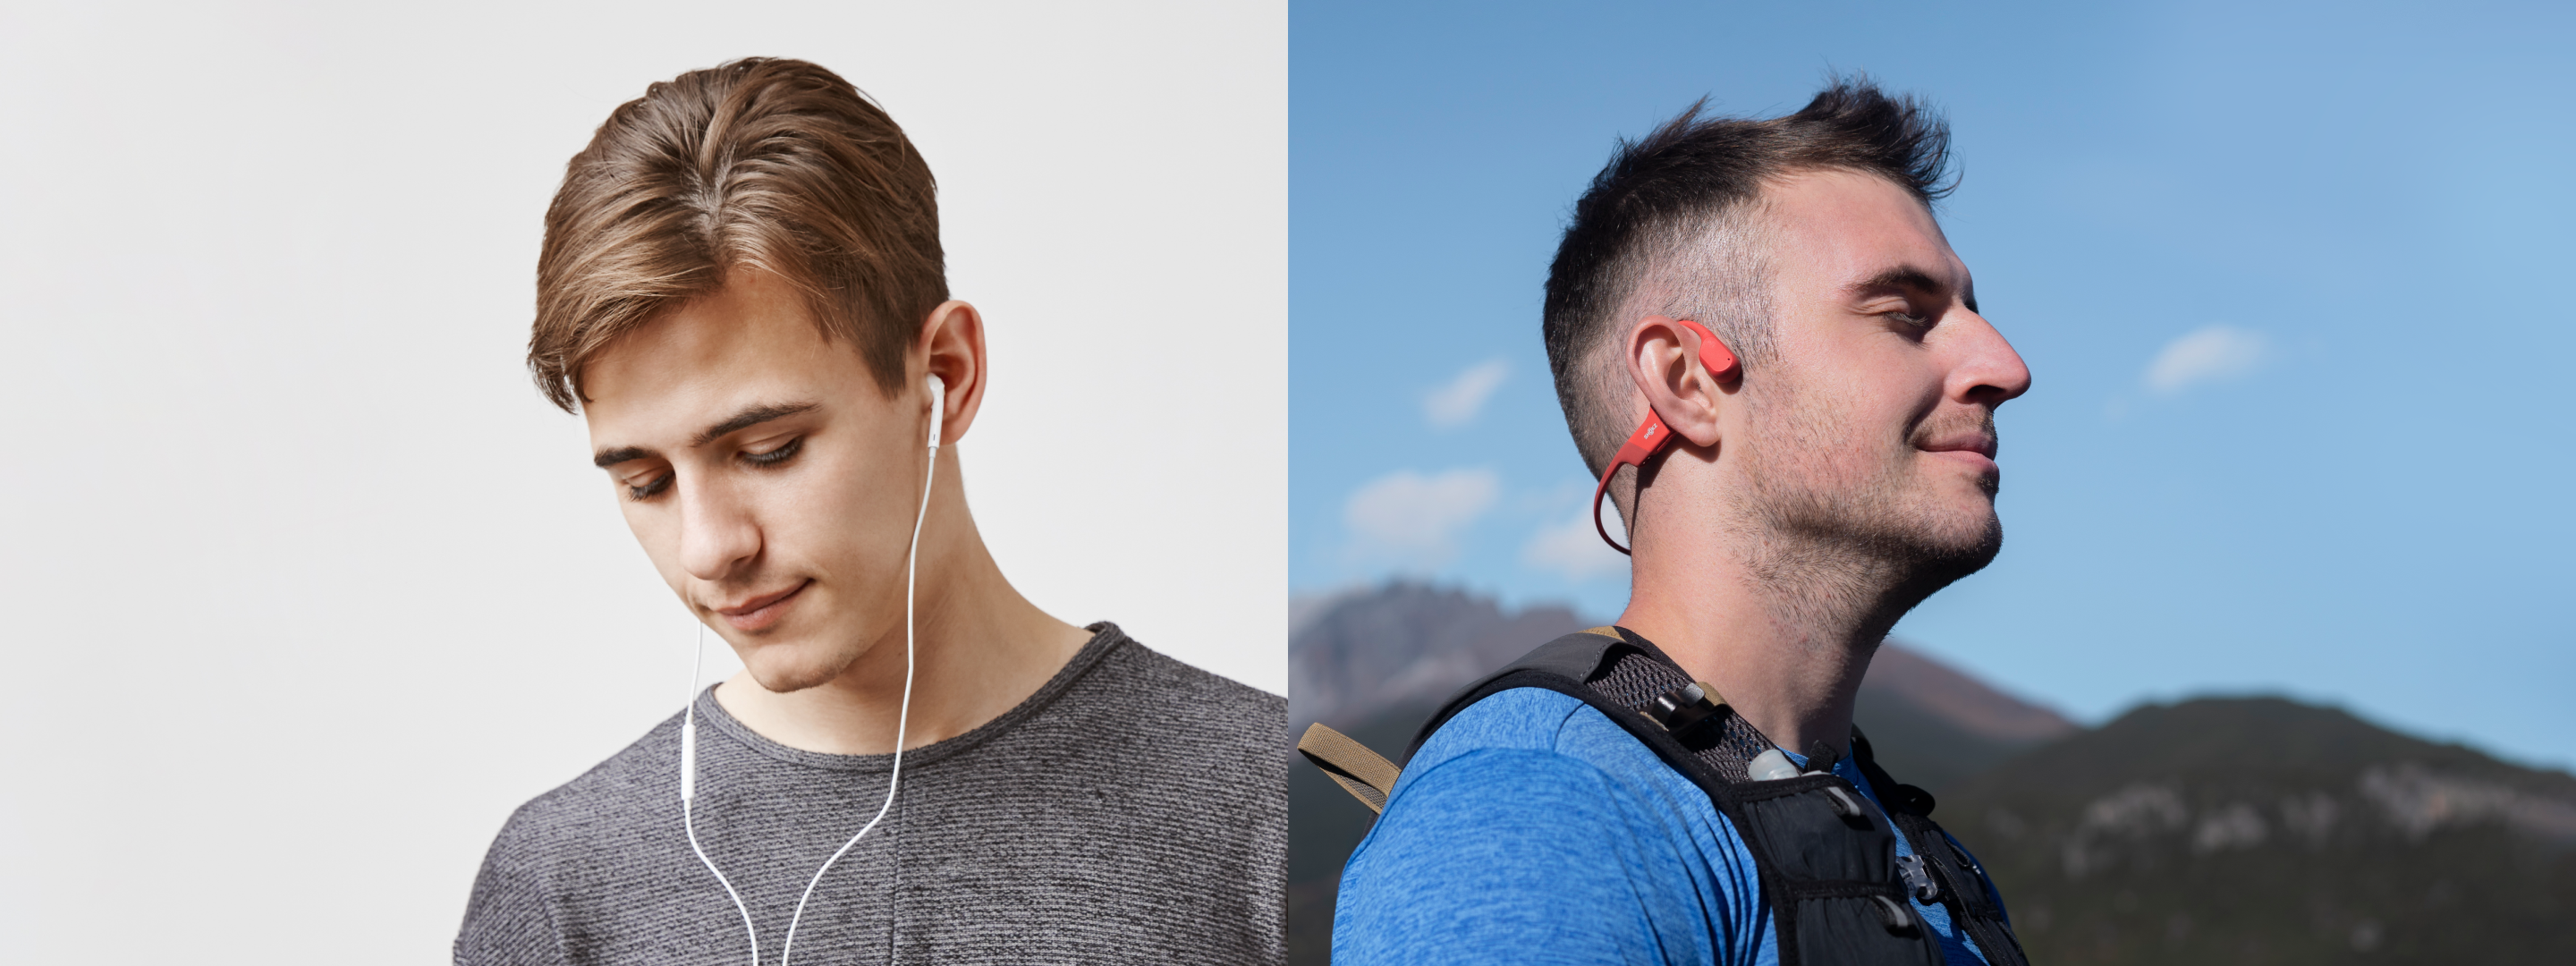 wired vs wireless headphones which one should you choose shokz canada